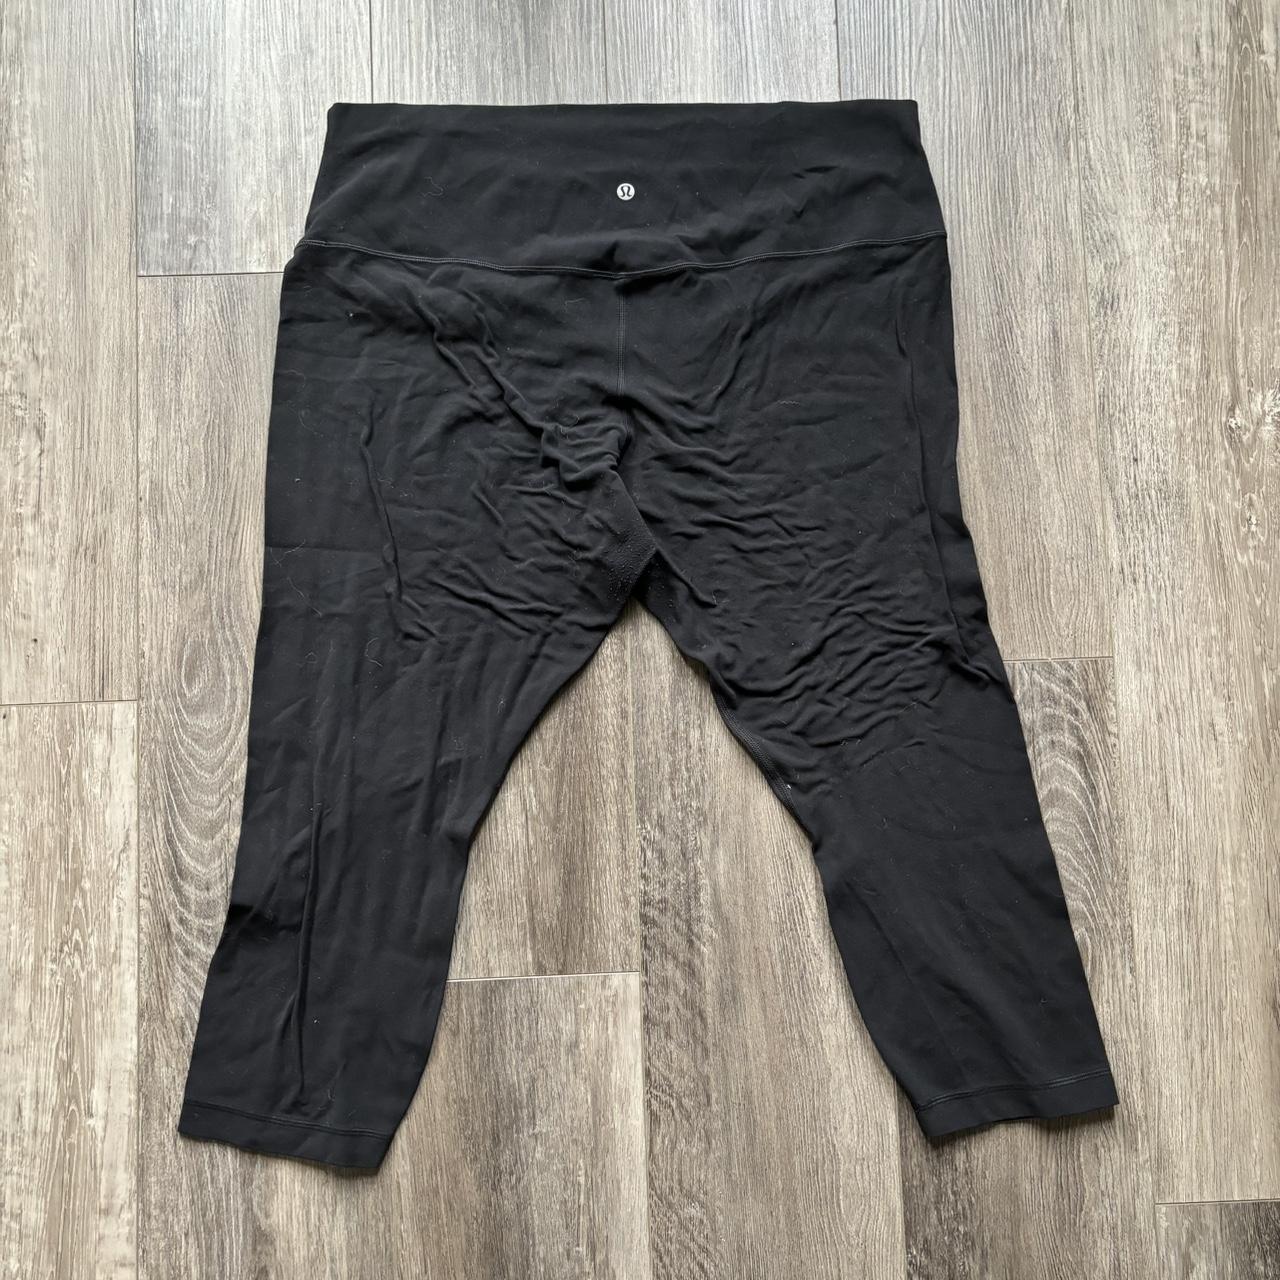 Lululemon align cropped. Size 18. Great condition, - Depop